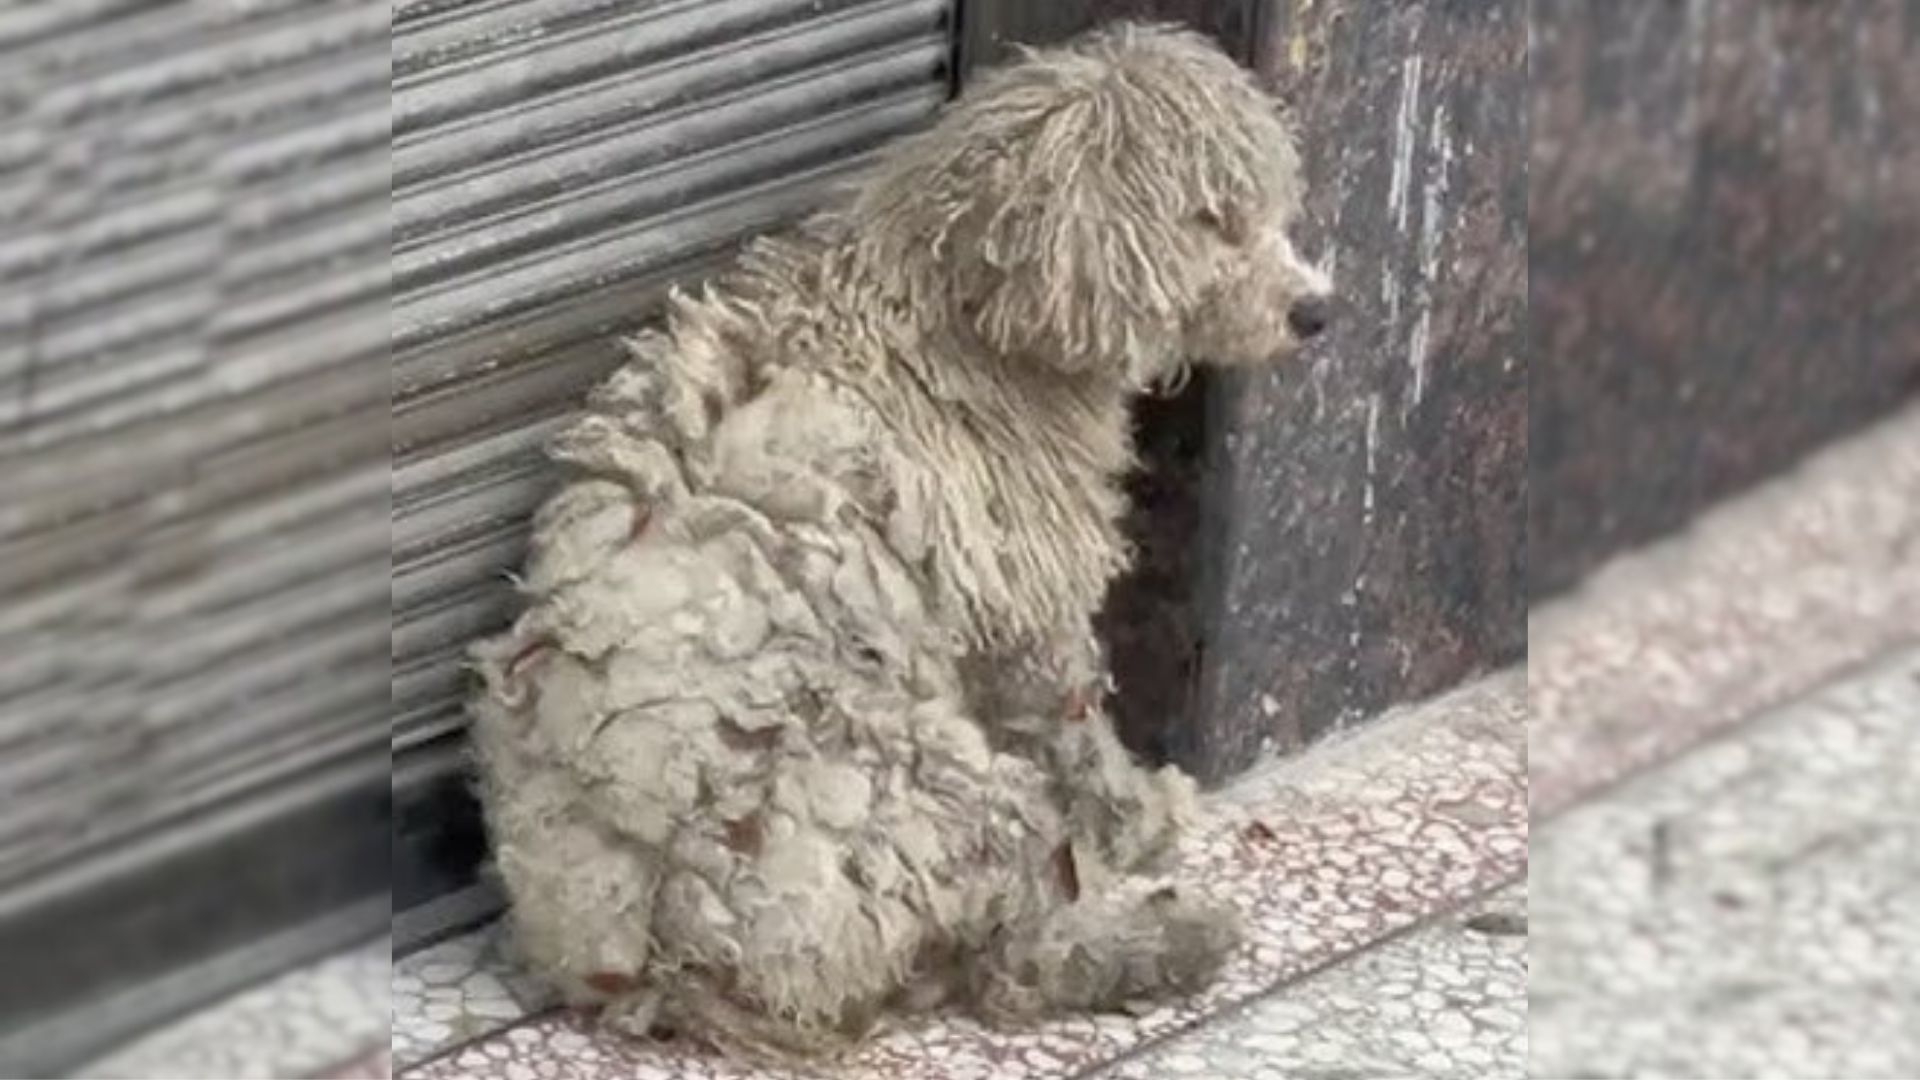 This Poor Pup Was Shivering So Much Until Somebody Noticed Her And Decided To Help